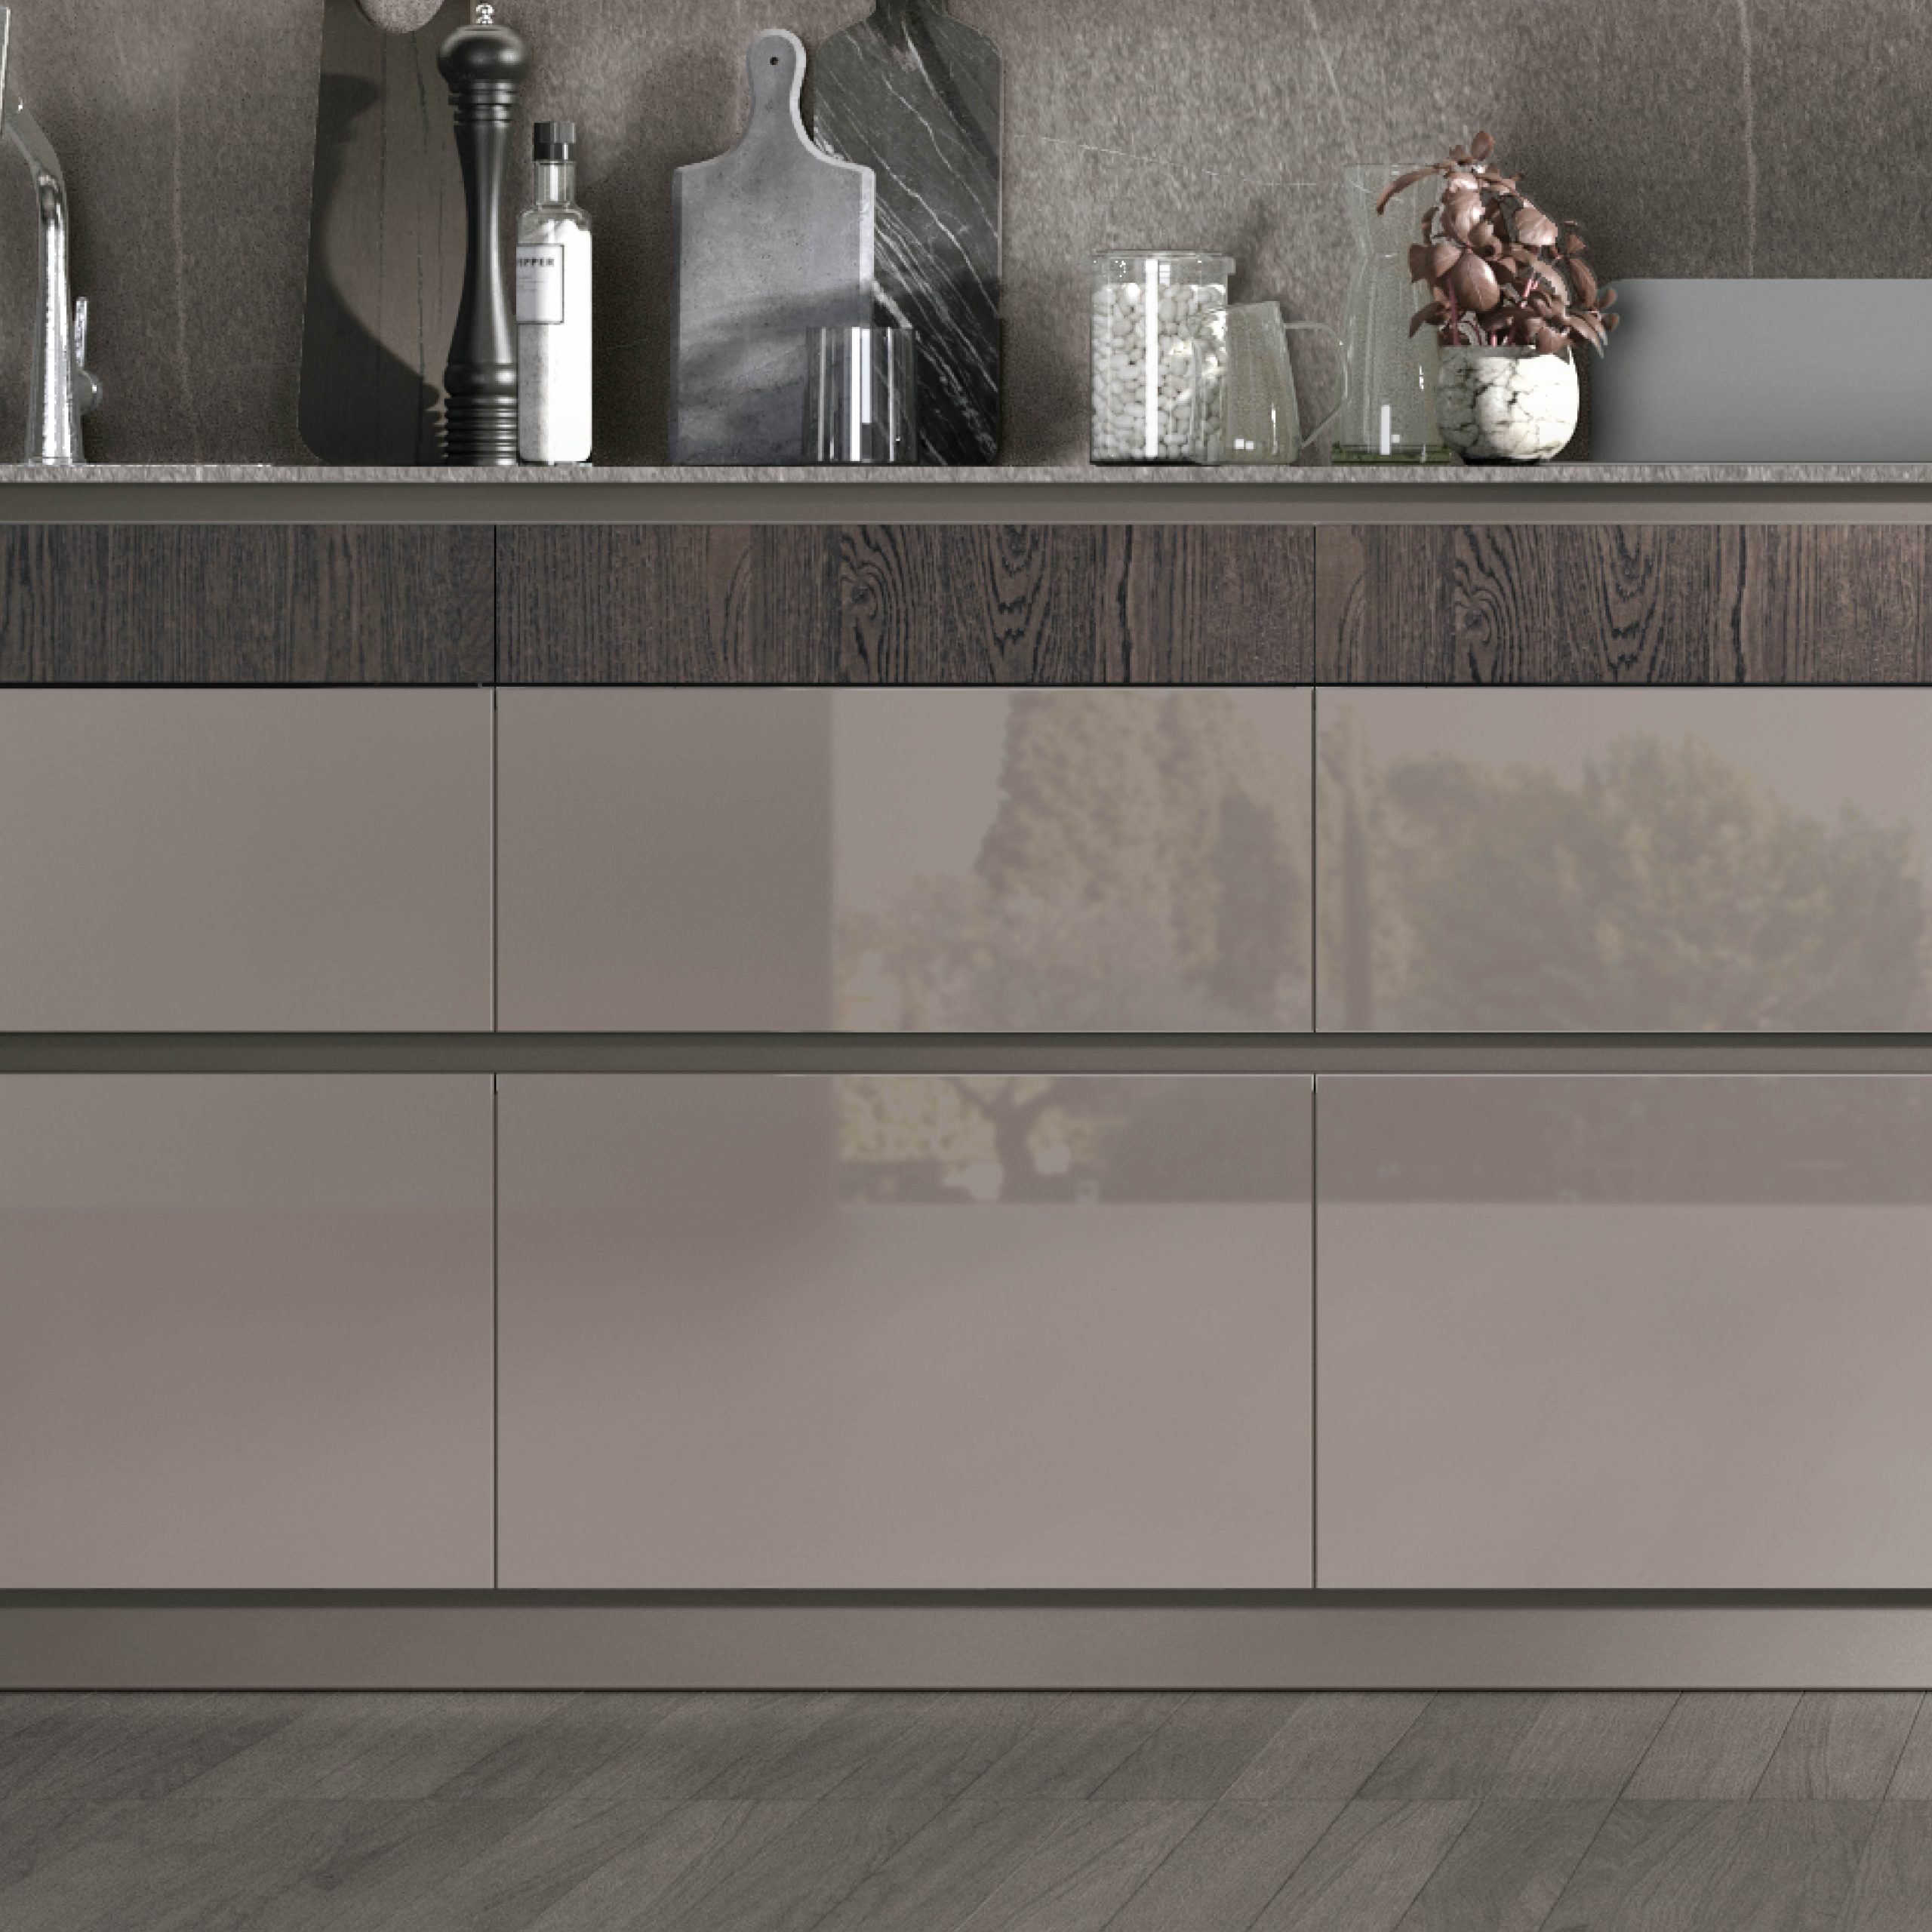 Modern Kitchens NYC - Color Trend - 5 Laccato Lucido Salina Scaled 1 - Stosa Cucine
